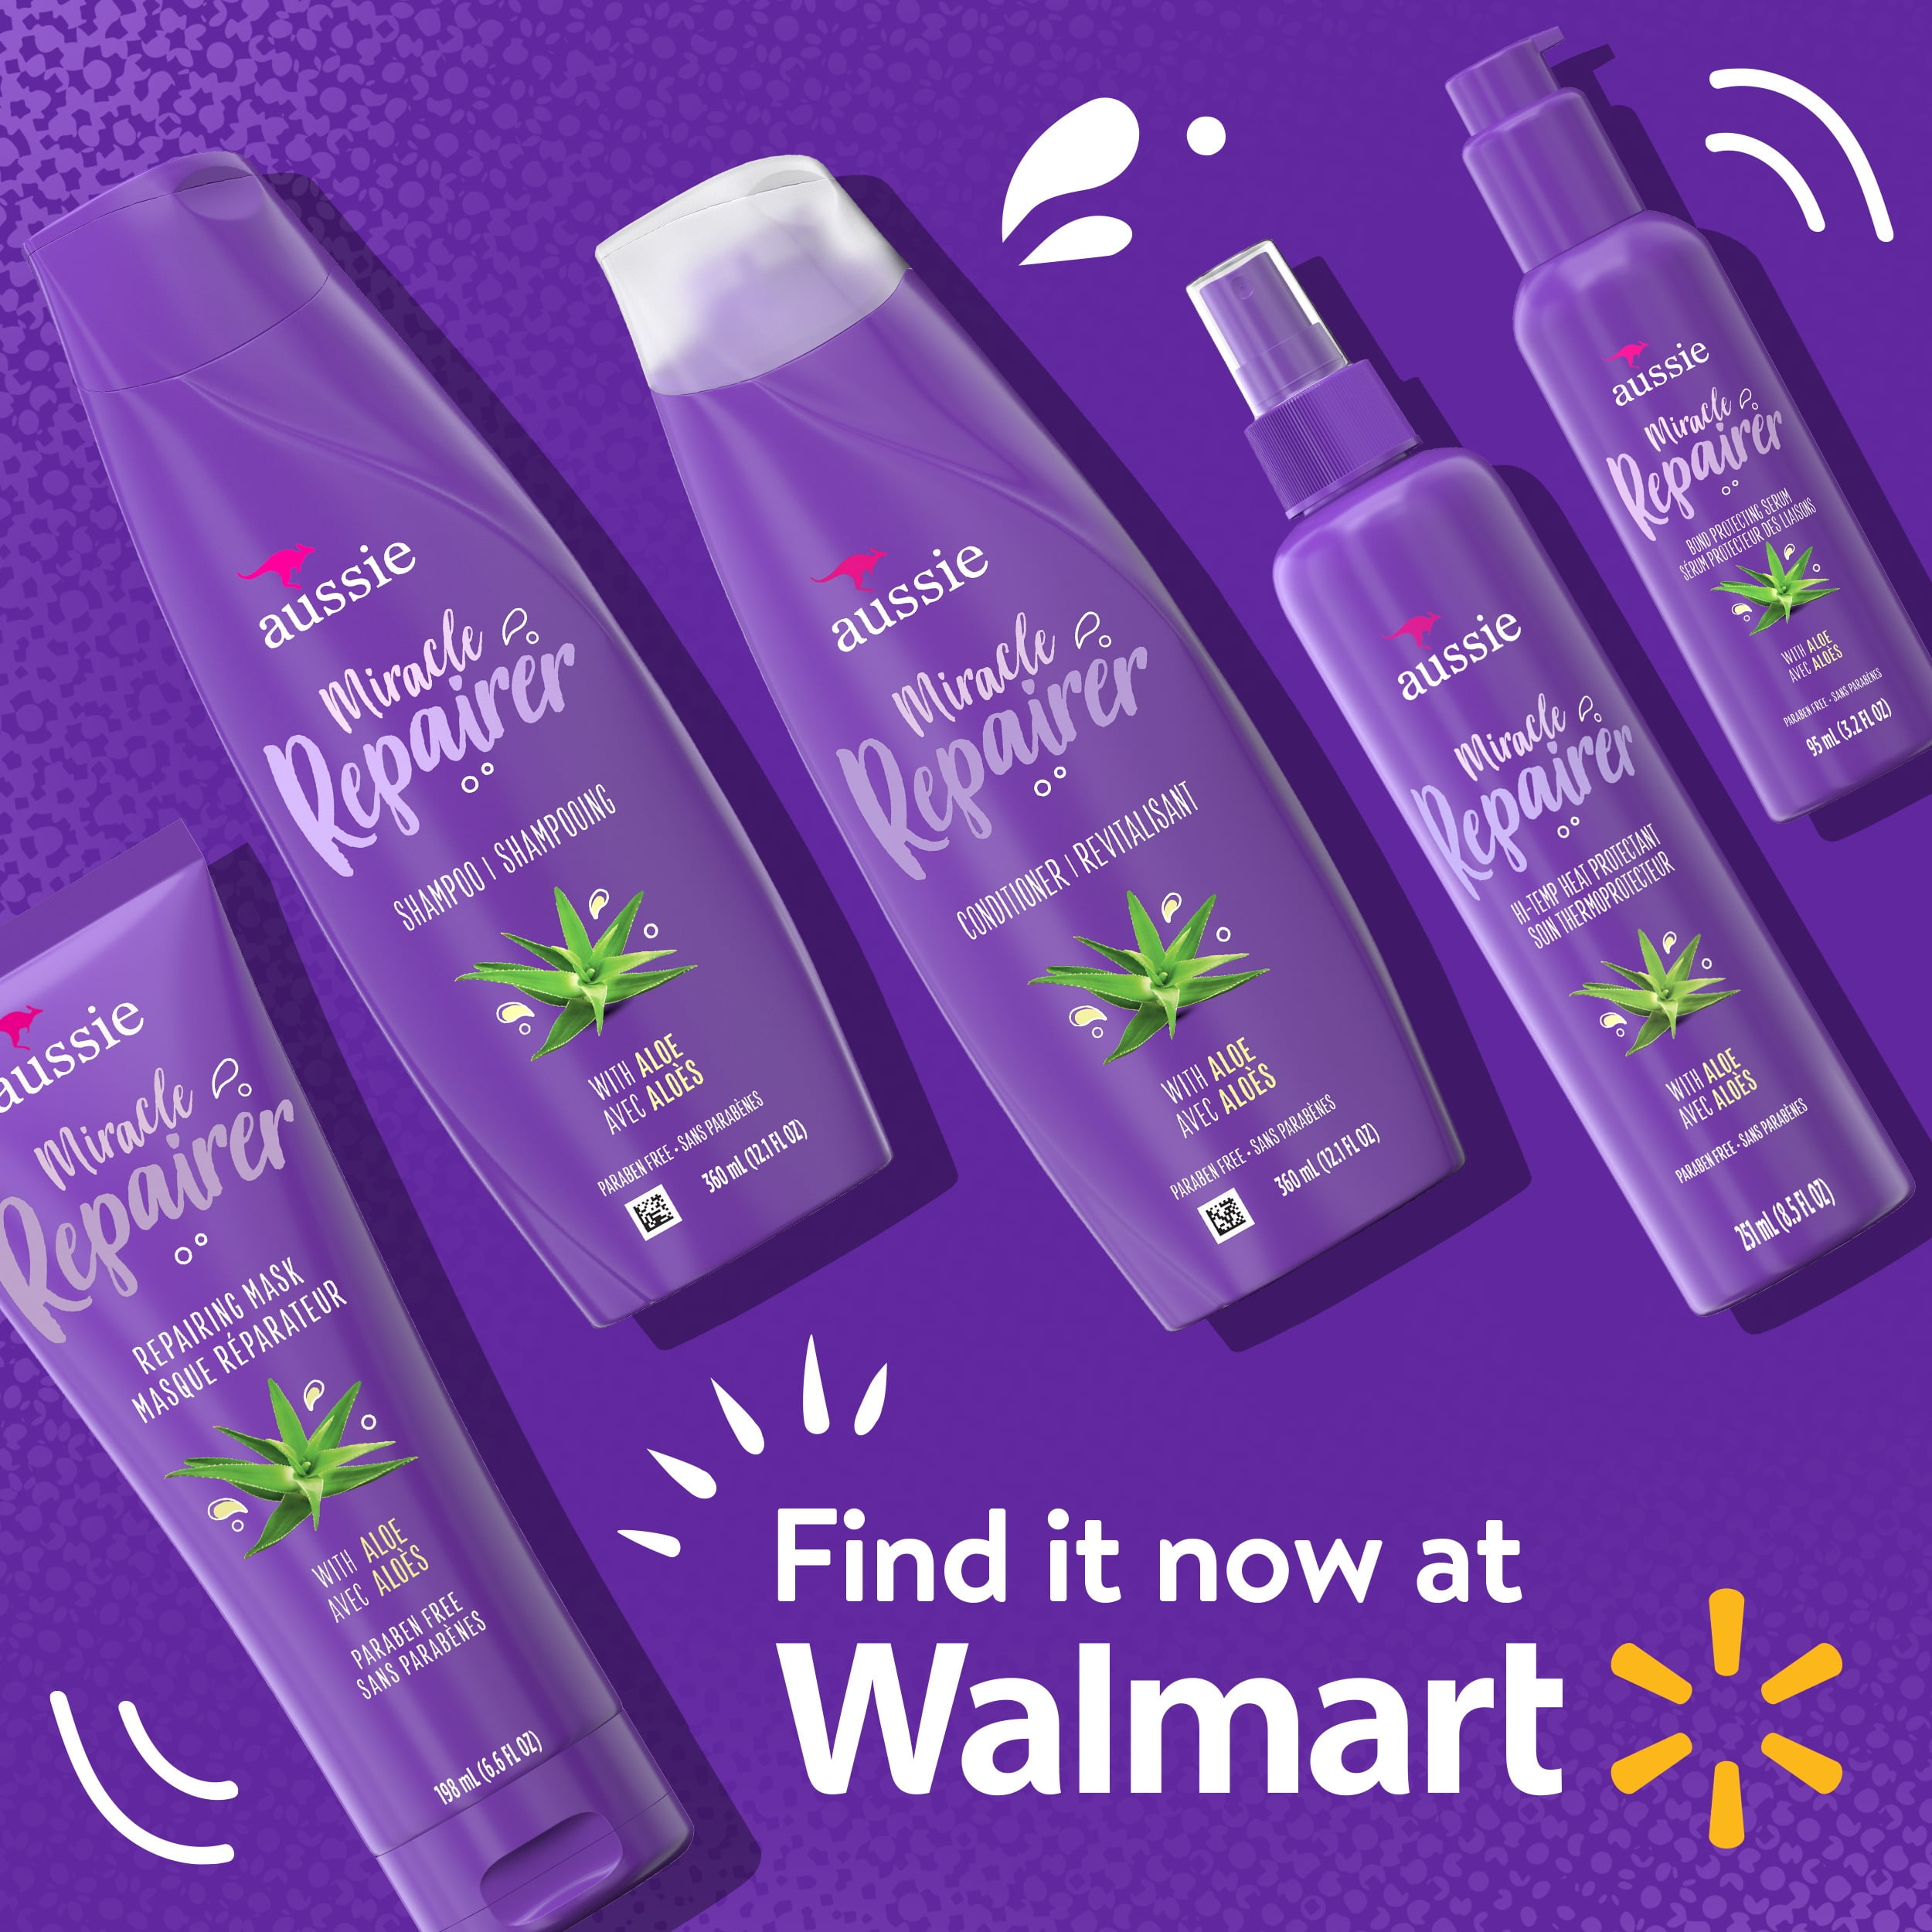 Aussie Miracle Repairer Shampoo with All Types, 12.1 fl - Walmart.com